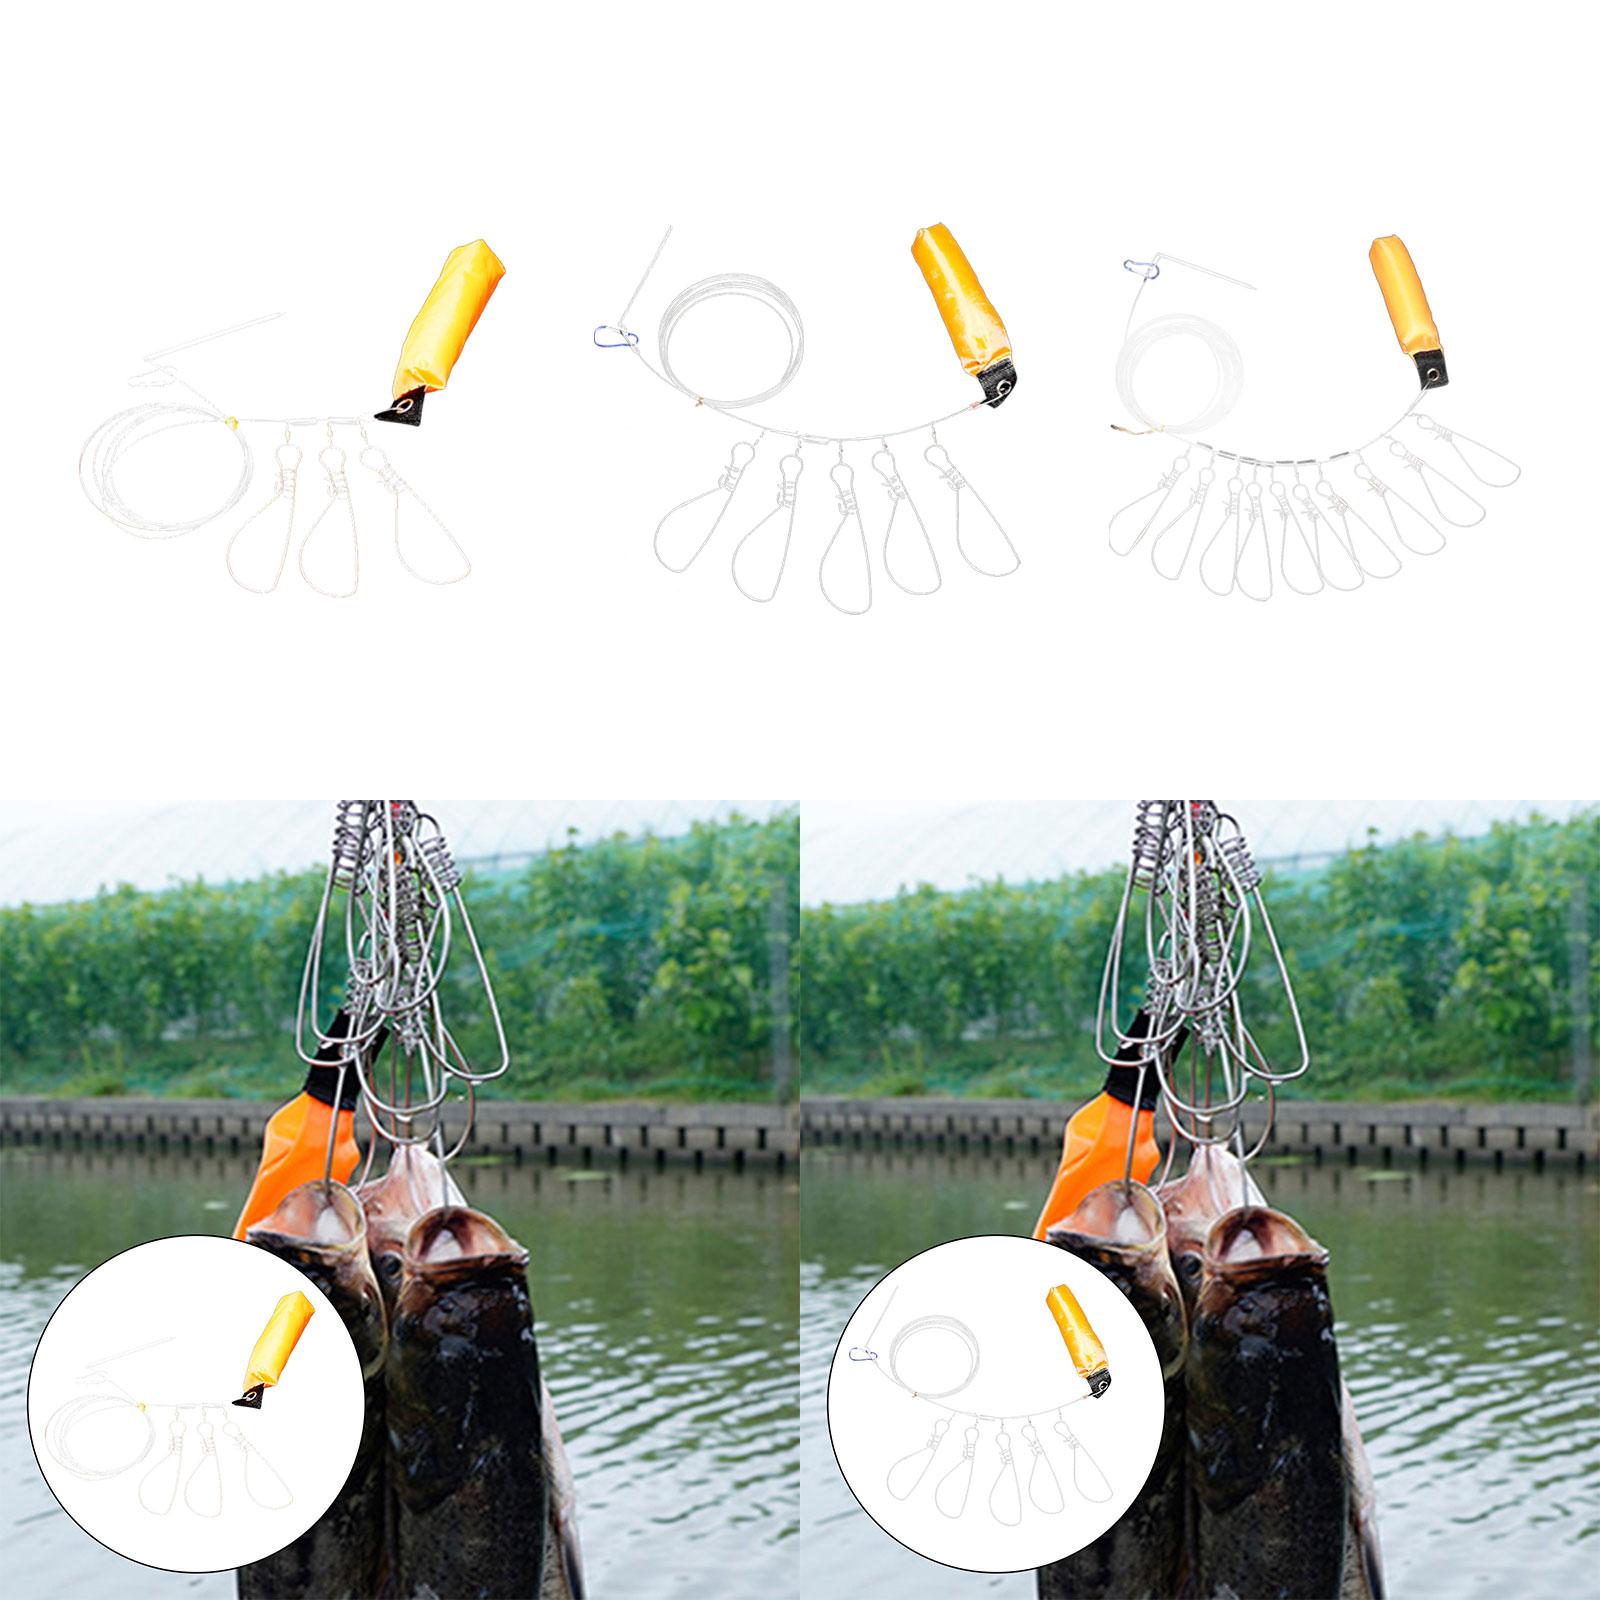 Fishing Stringer Clip, Heavy Duty Stainless Steel Kayak Fish Stringer Fishing Lock Cable with Buckle